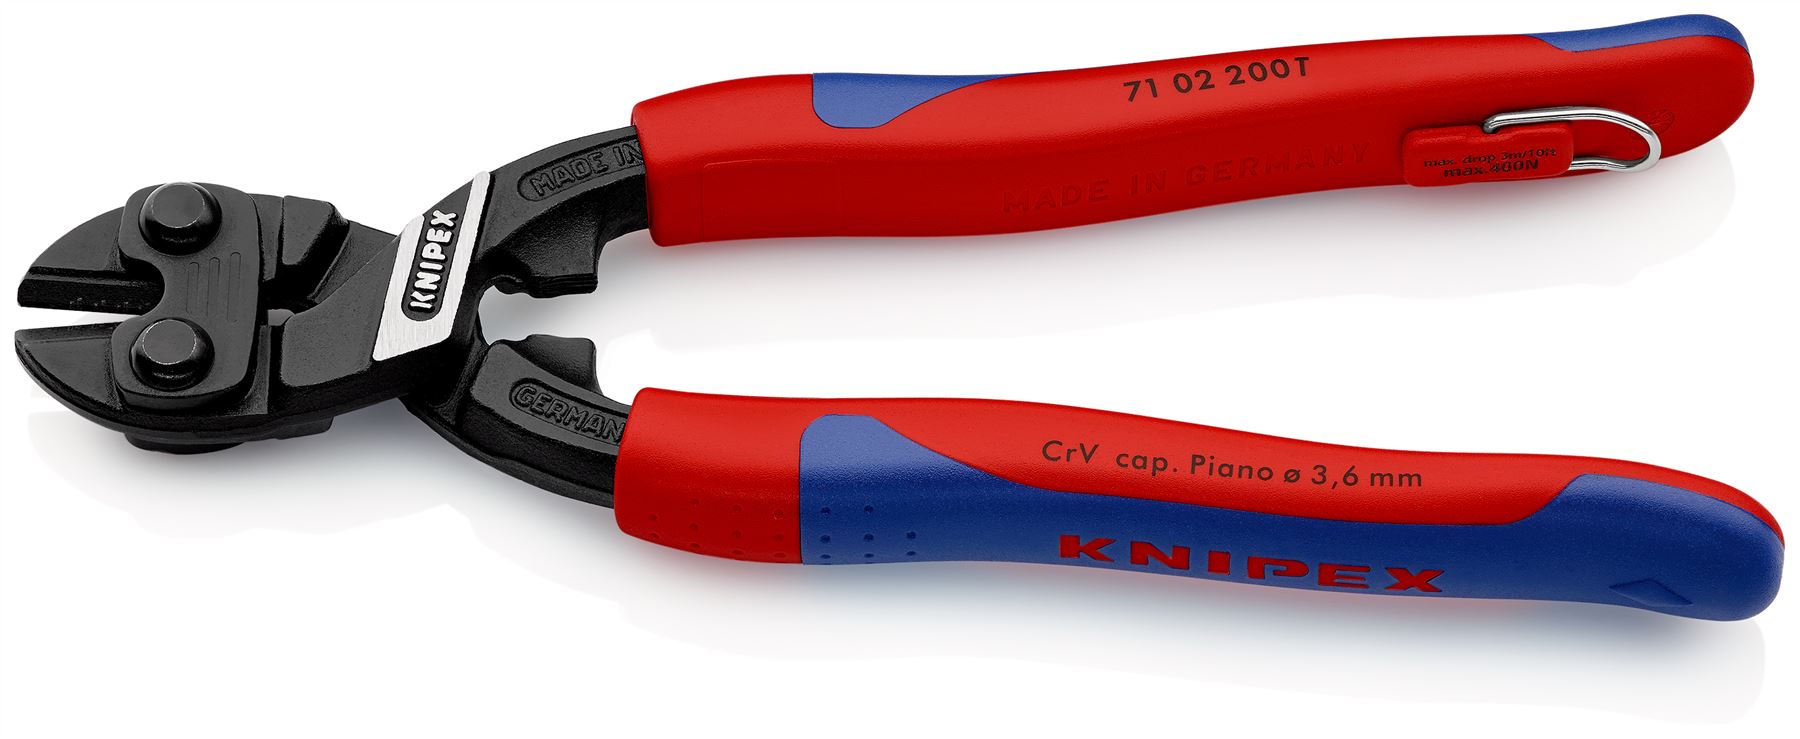 Knipex CoBolt Compact Bolt Cutters Cutting Pliers 200mm Multi Component Grips with Tether Point 71 02 200 T